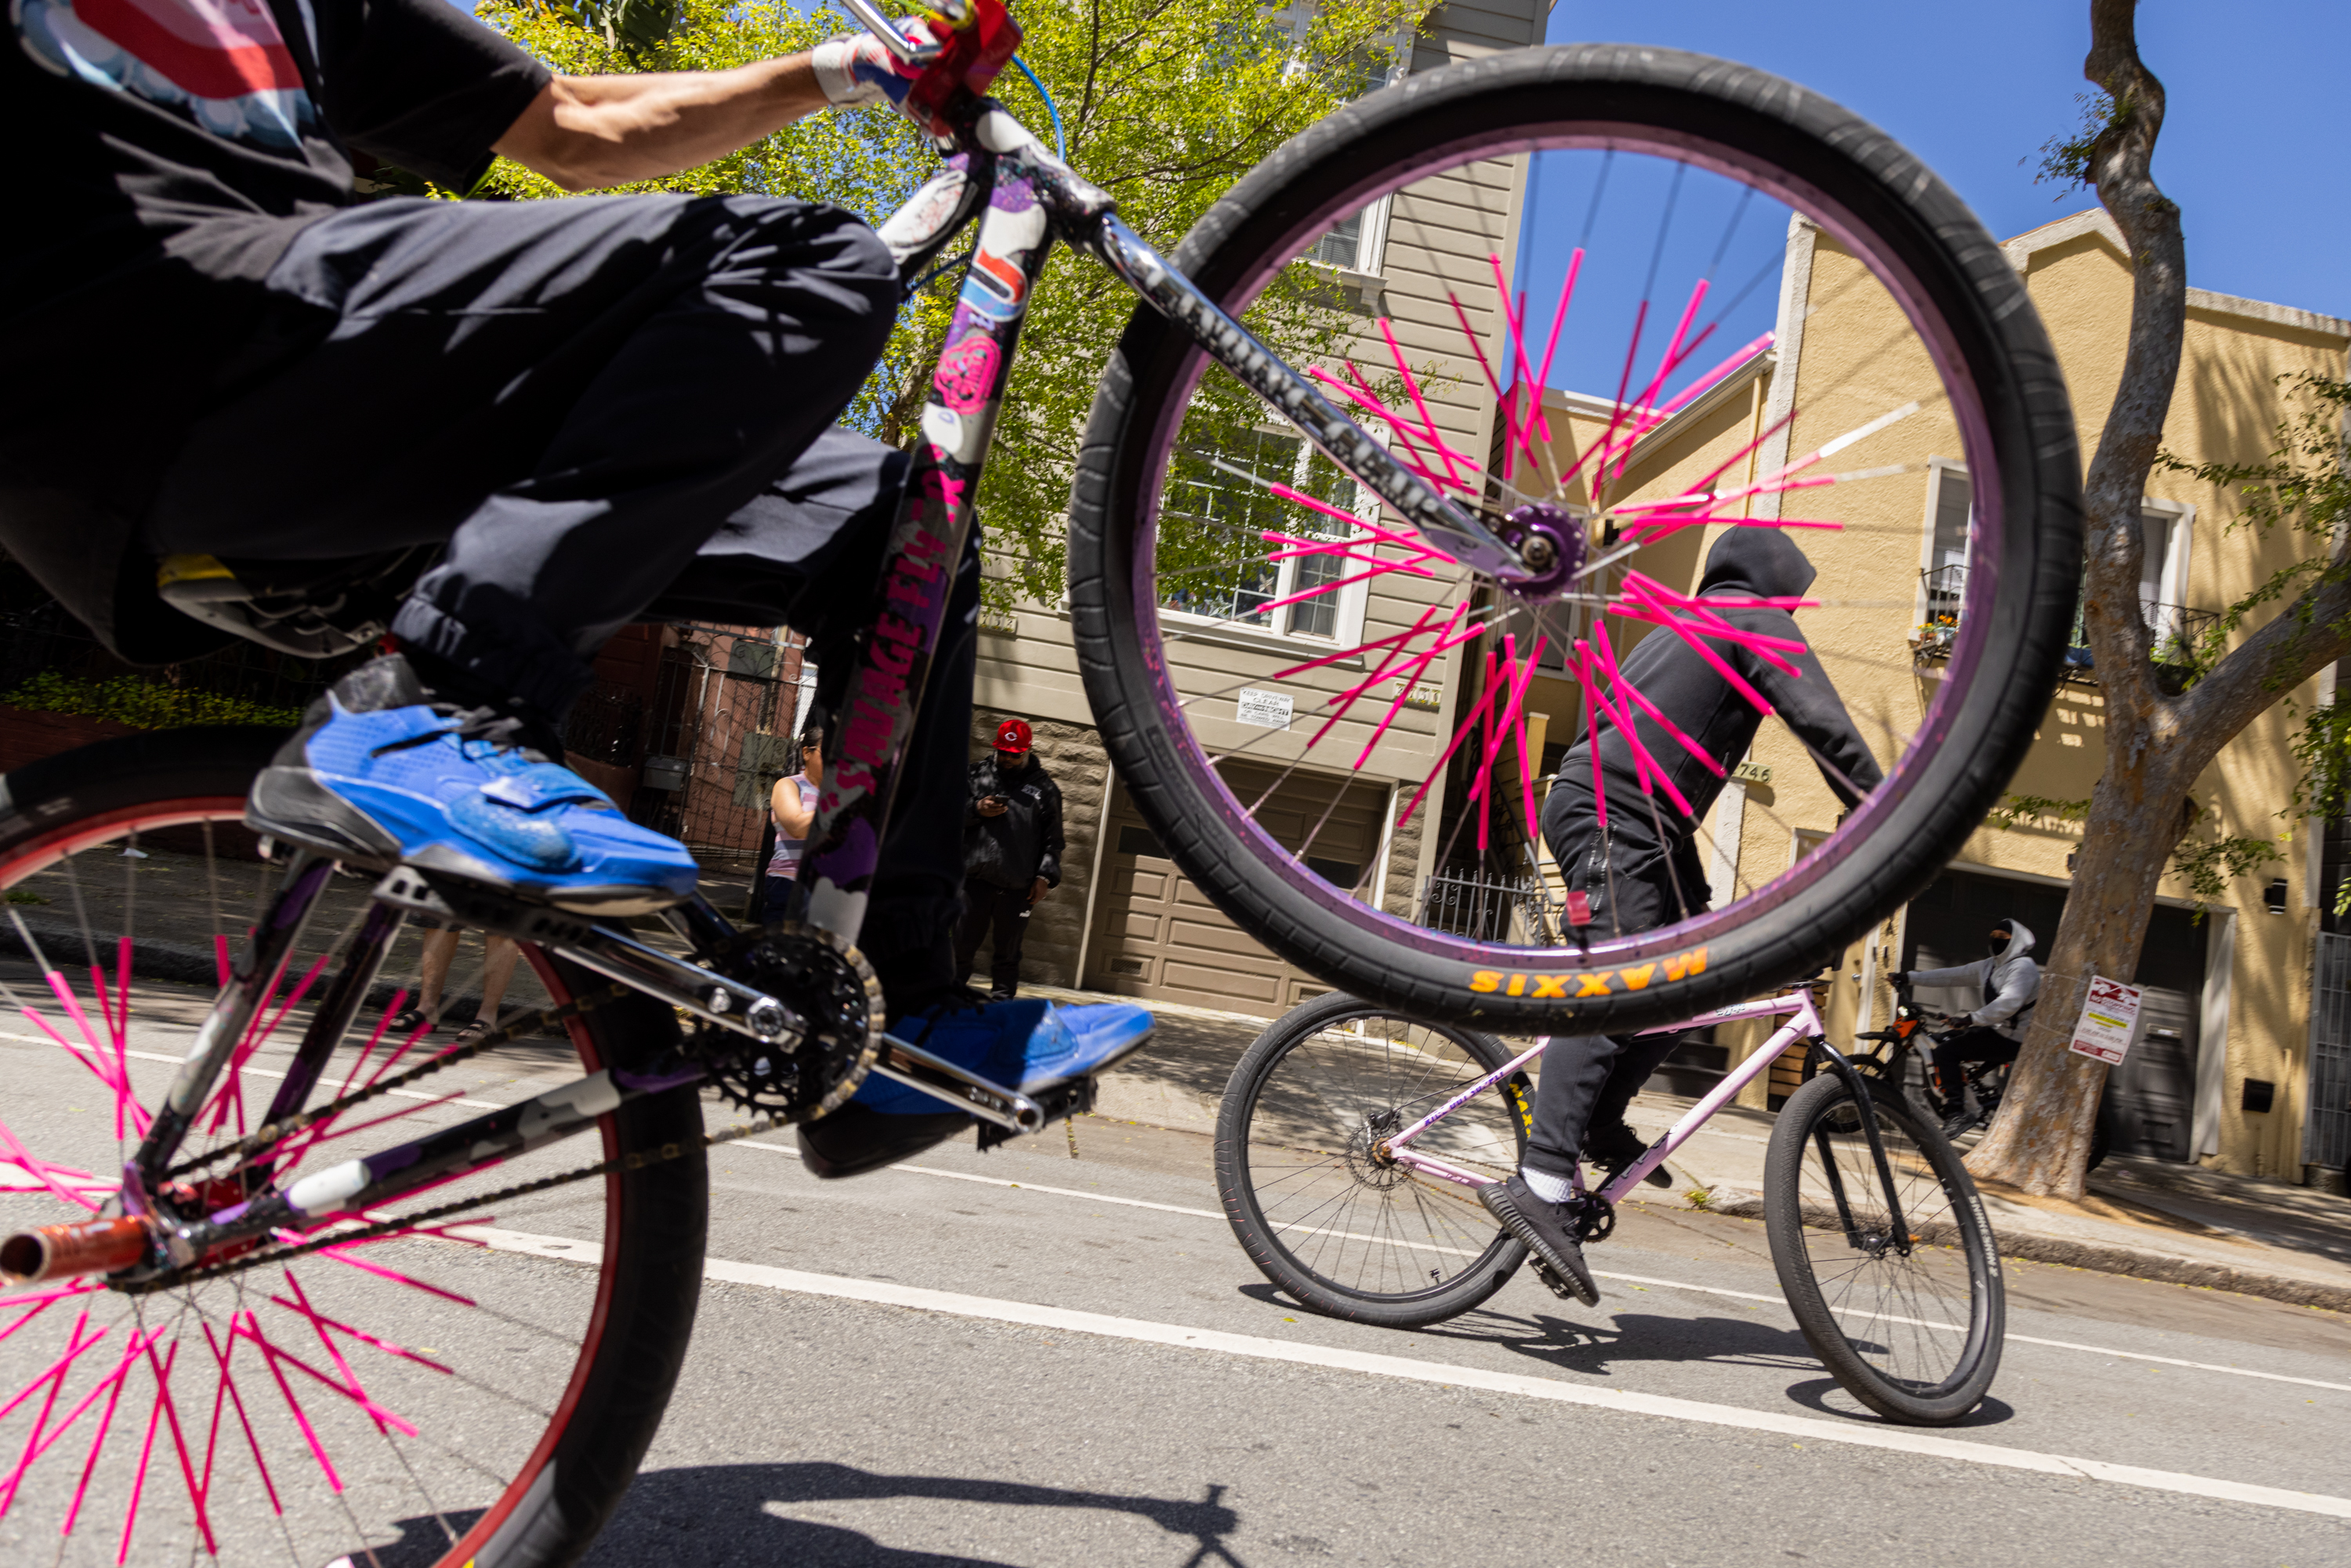 Cyclists perform stunts on bikes with vibrant pink spokes on a sunny street.